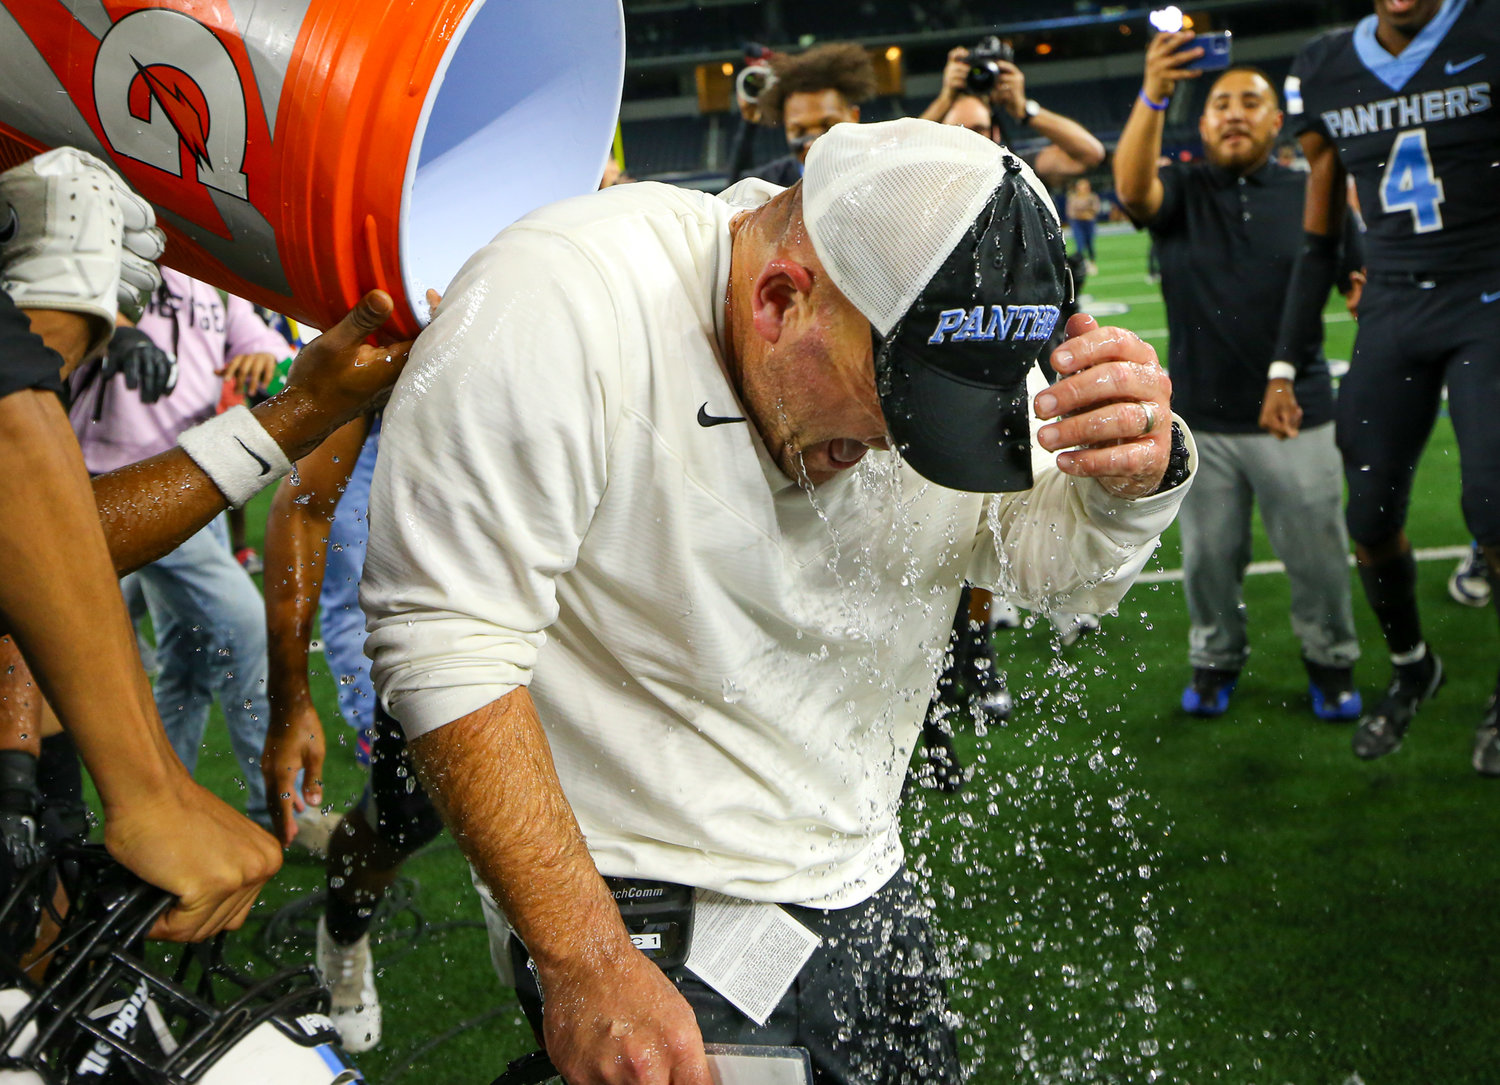 Players empty the water cooler on Paetow Panthers head coach B.J. Gotte after a 27-24 overtime win over College Station in the Class Class 5A Division I state football championship game on December 17, 2021 in Arlington, Texas.